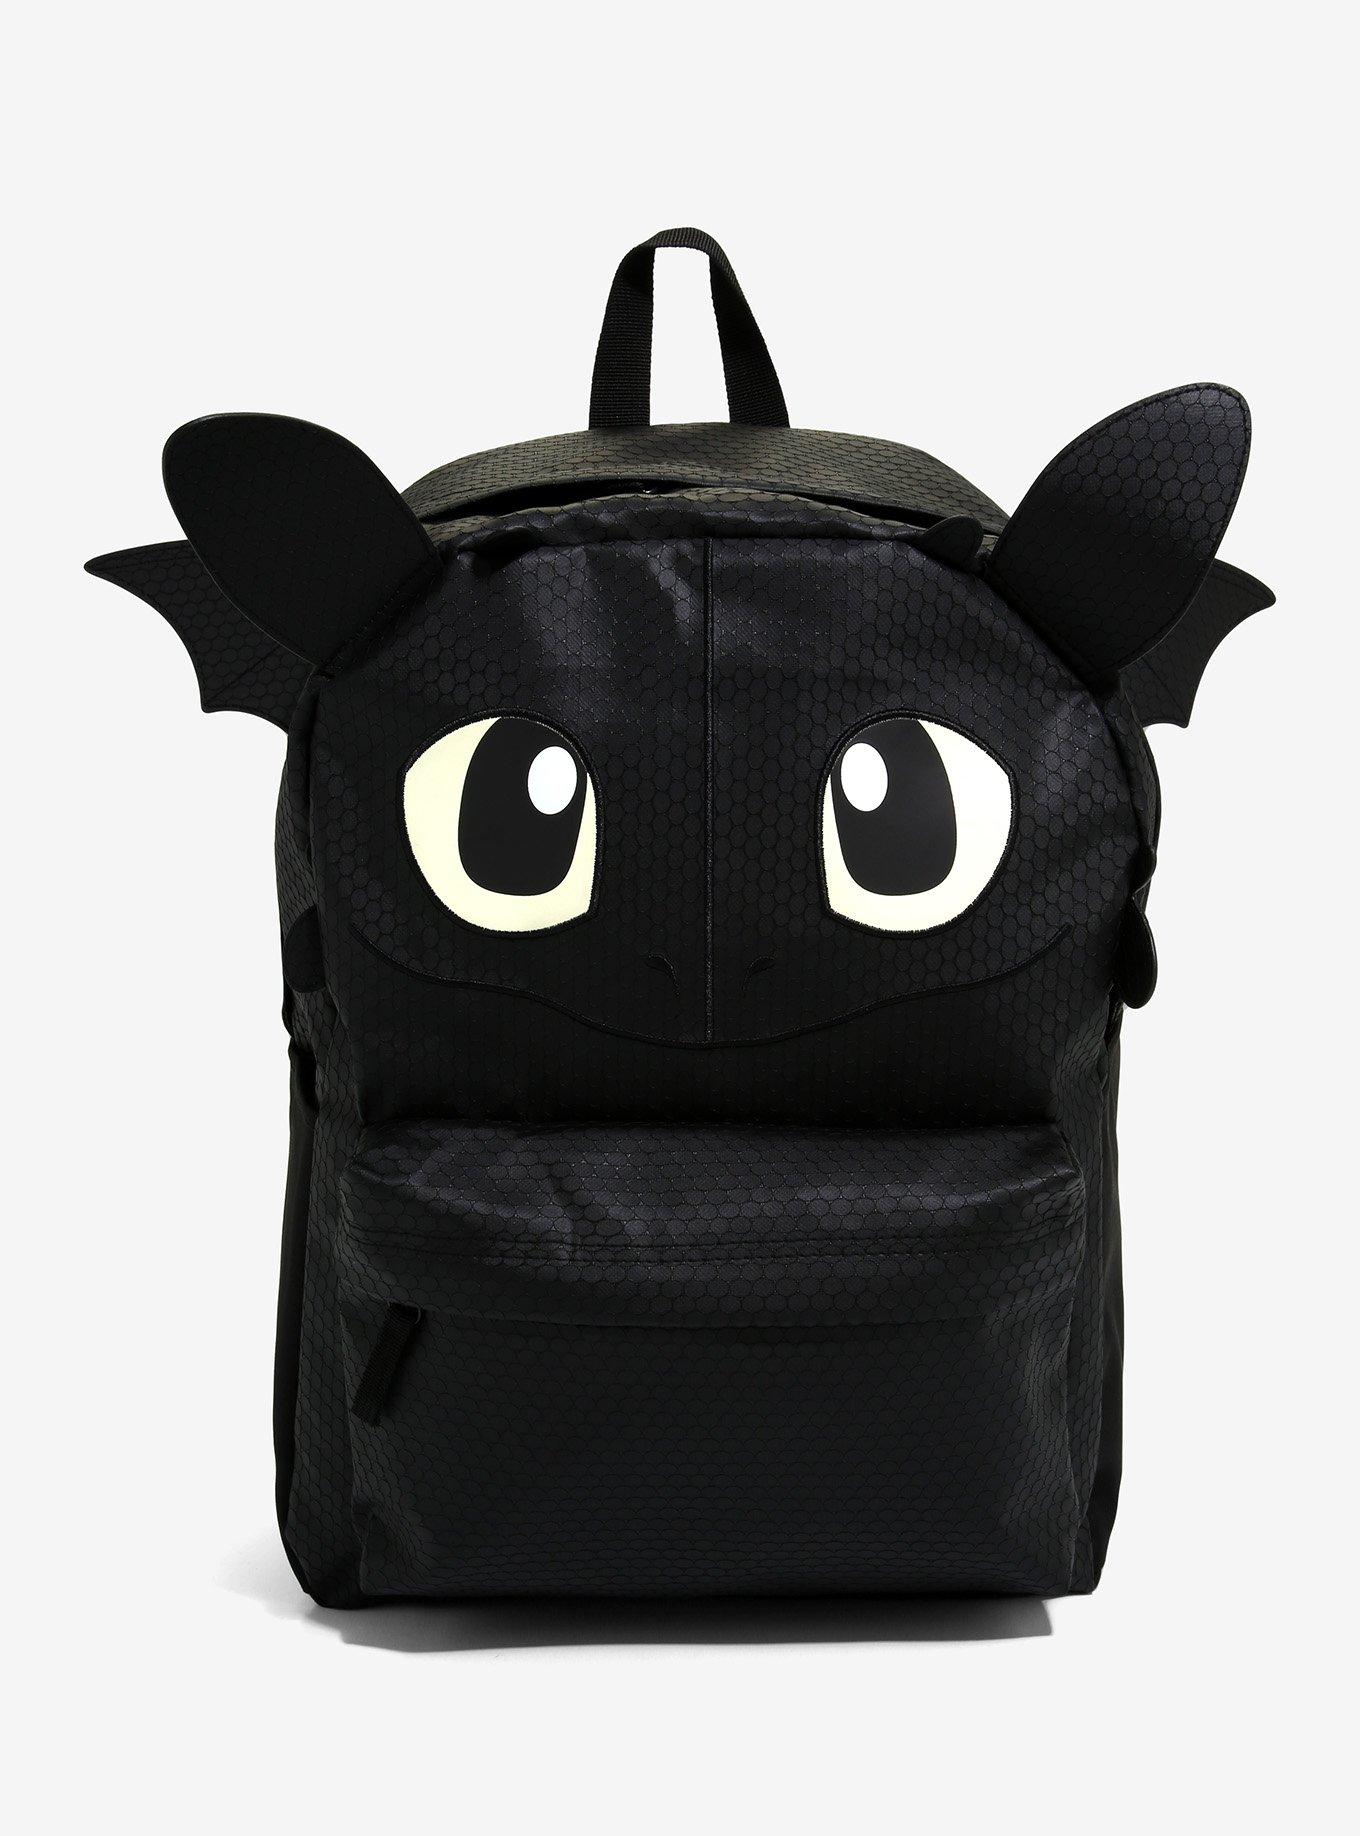 How To Train Your Dragon Toothless Backpack, , hi-res